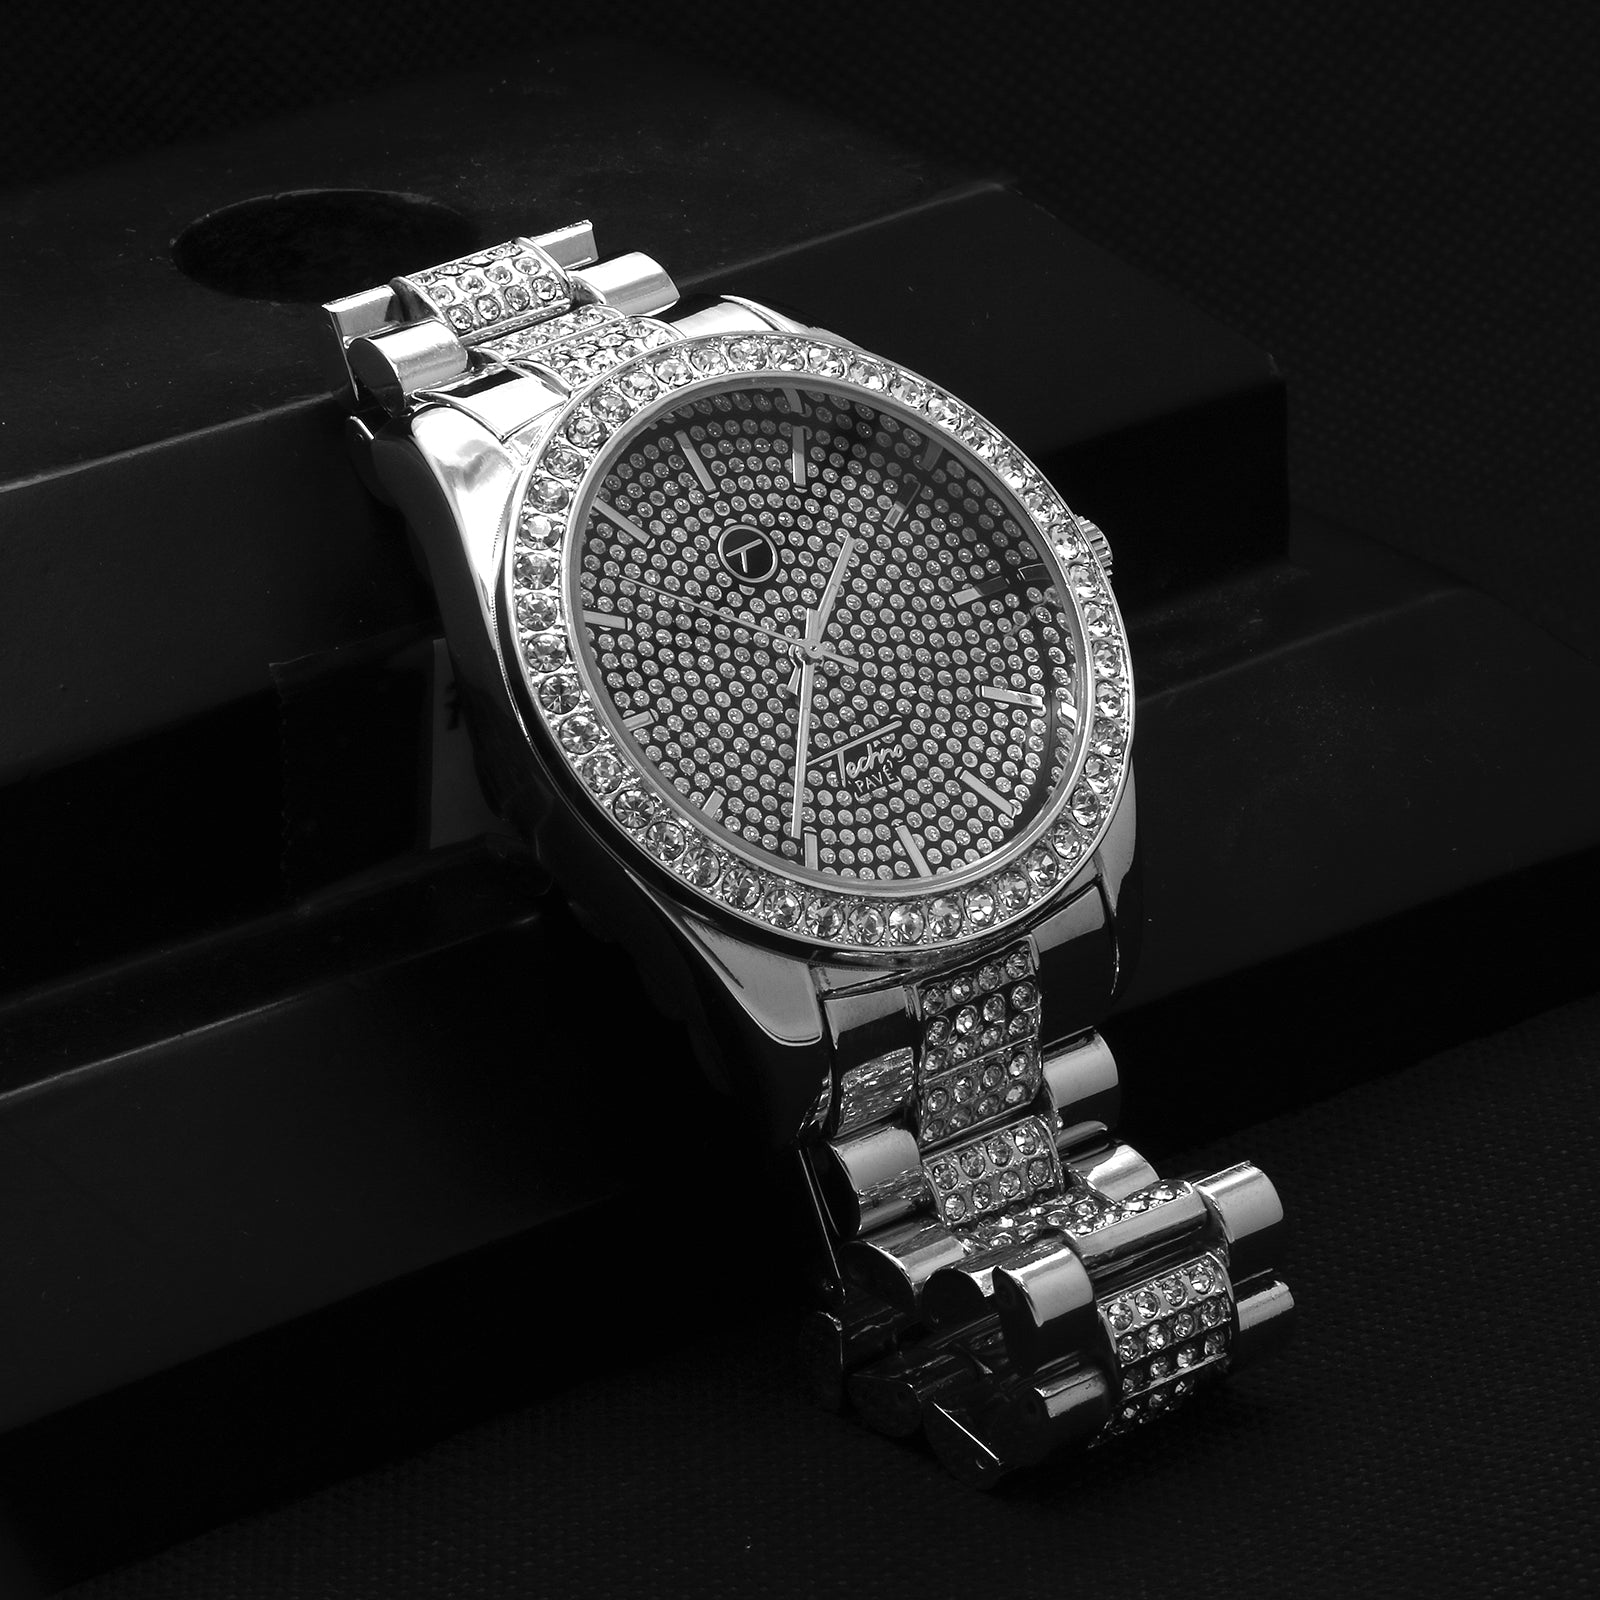 Silver Ice Out Techno Pave Rolex Style Watch